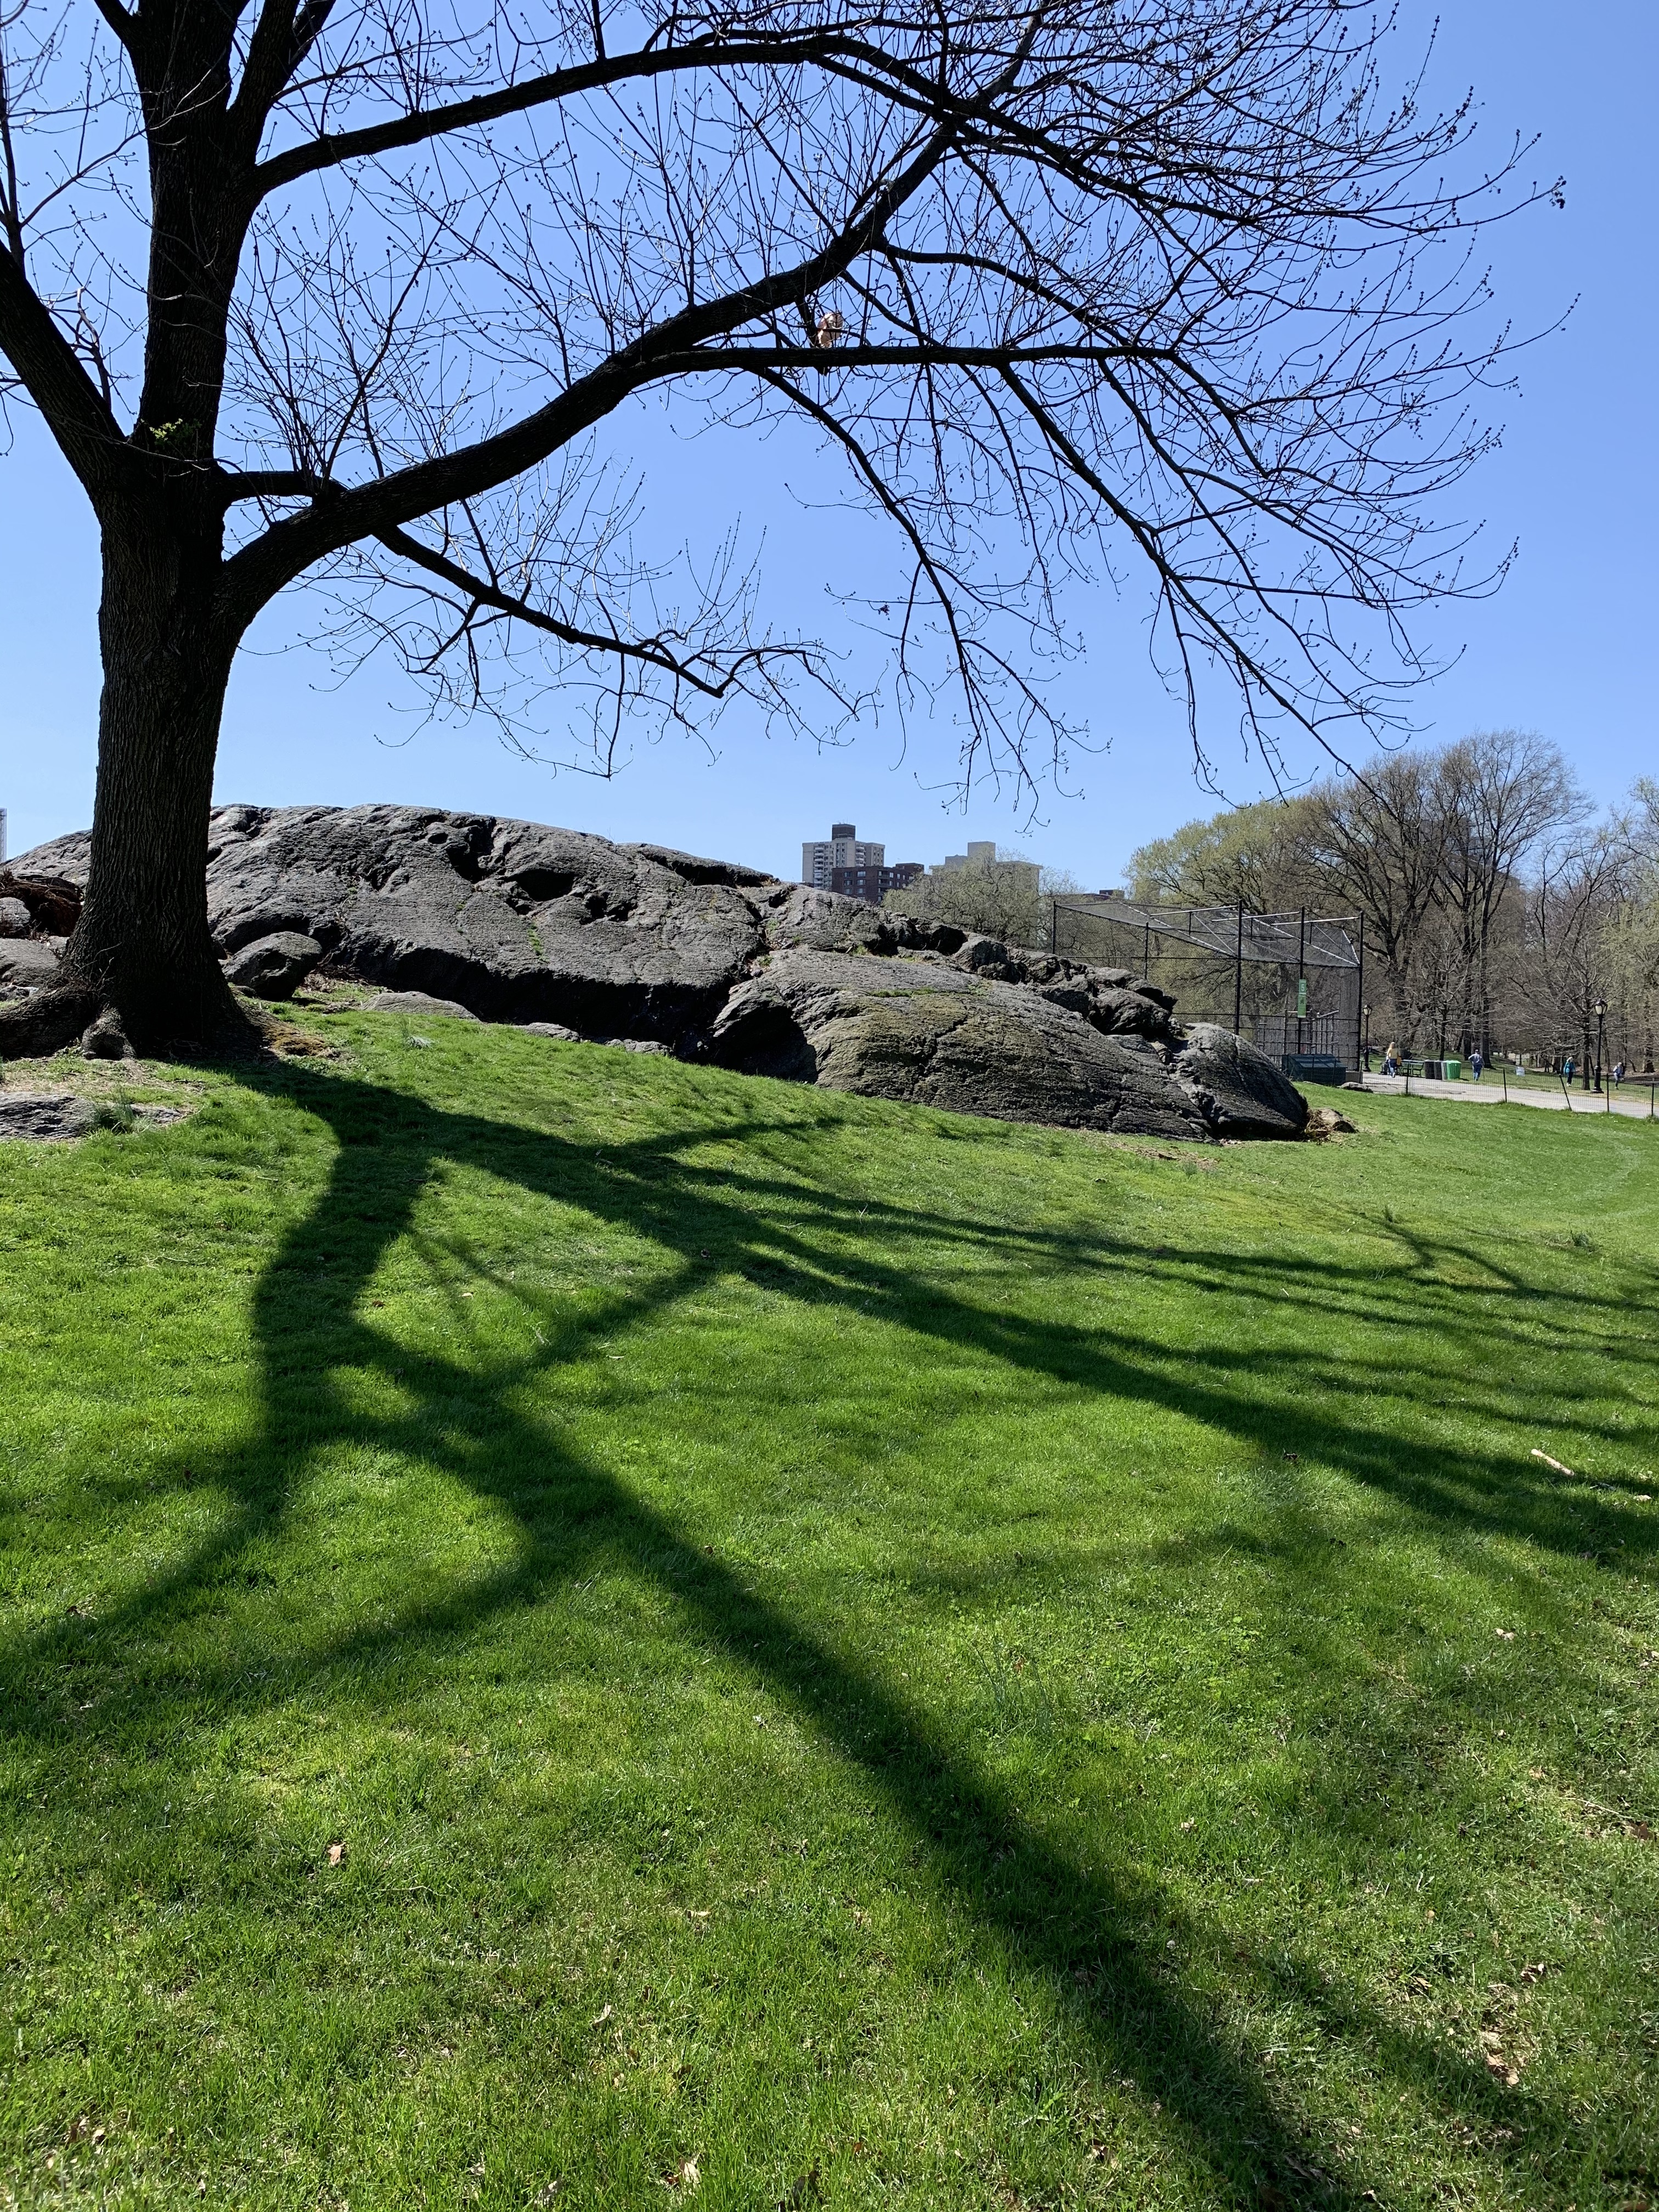 tree casting a shadow over green grass in Central Park, NYC